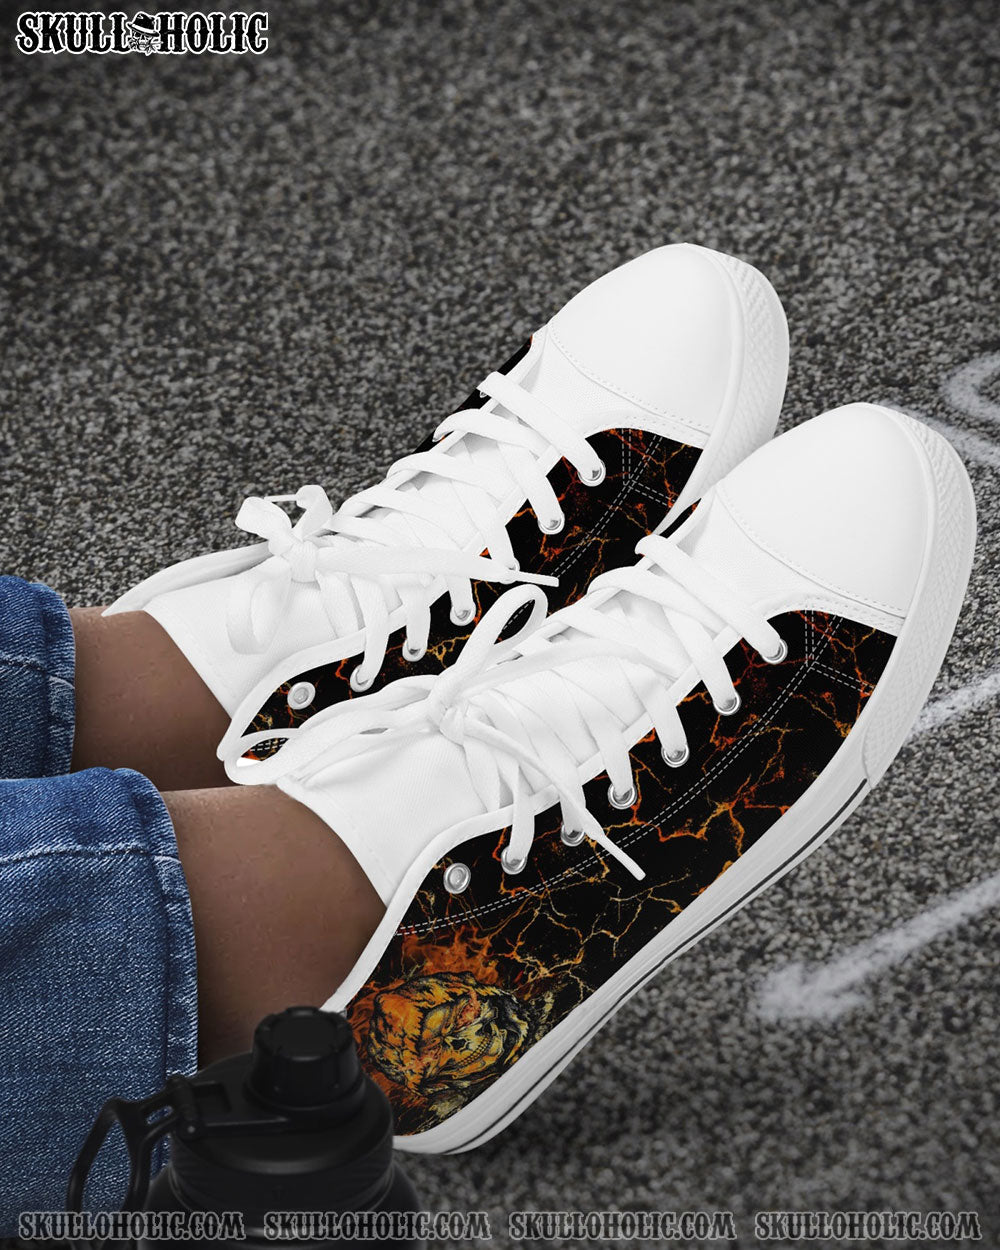 REAPER SKULL FIRE HIGH TOP CANVAS SHOES - YHTG1708222